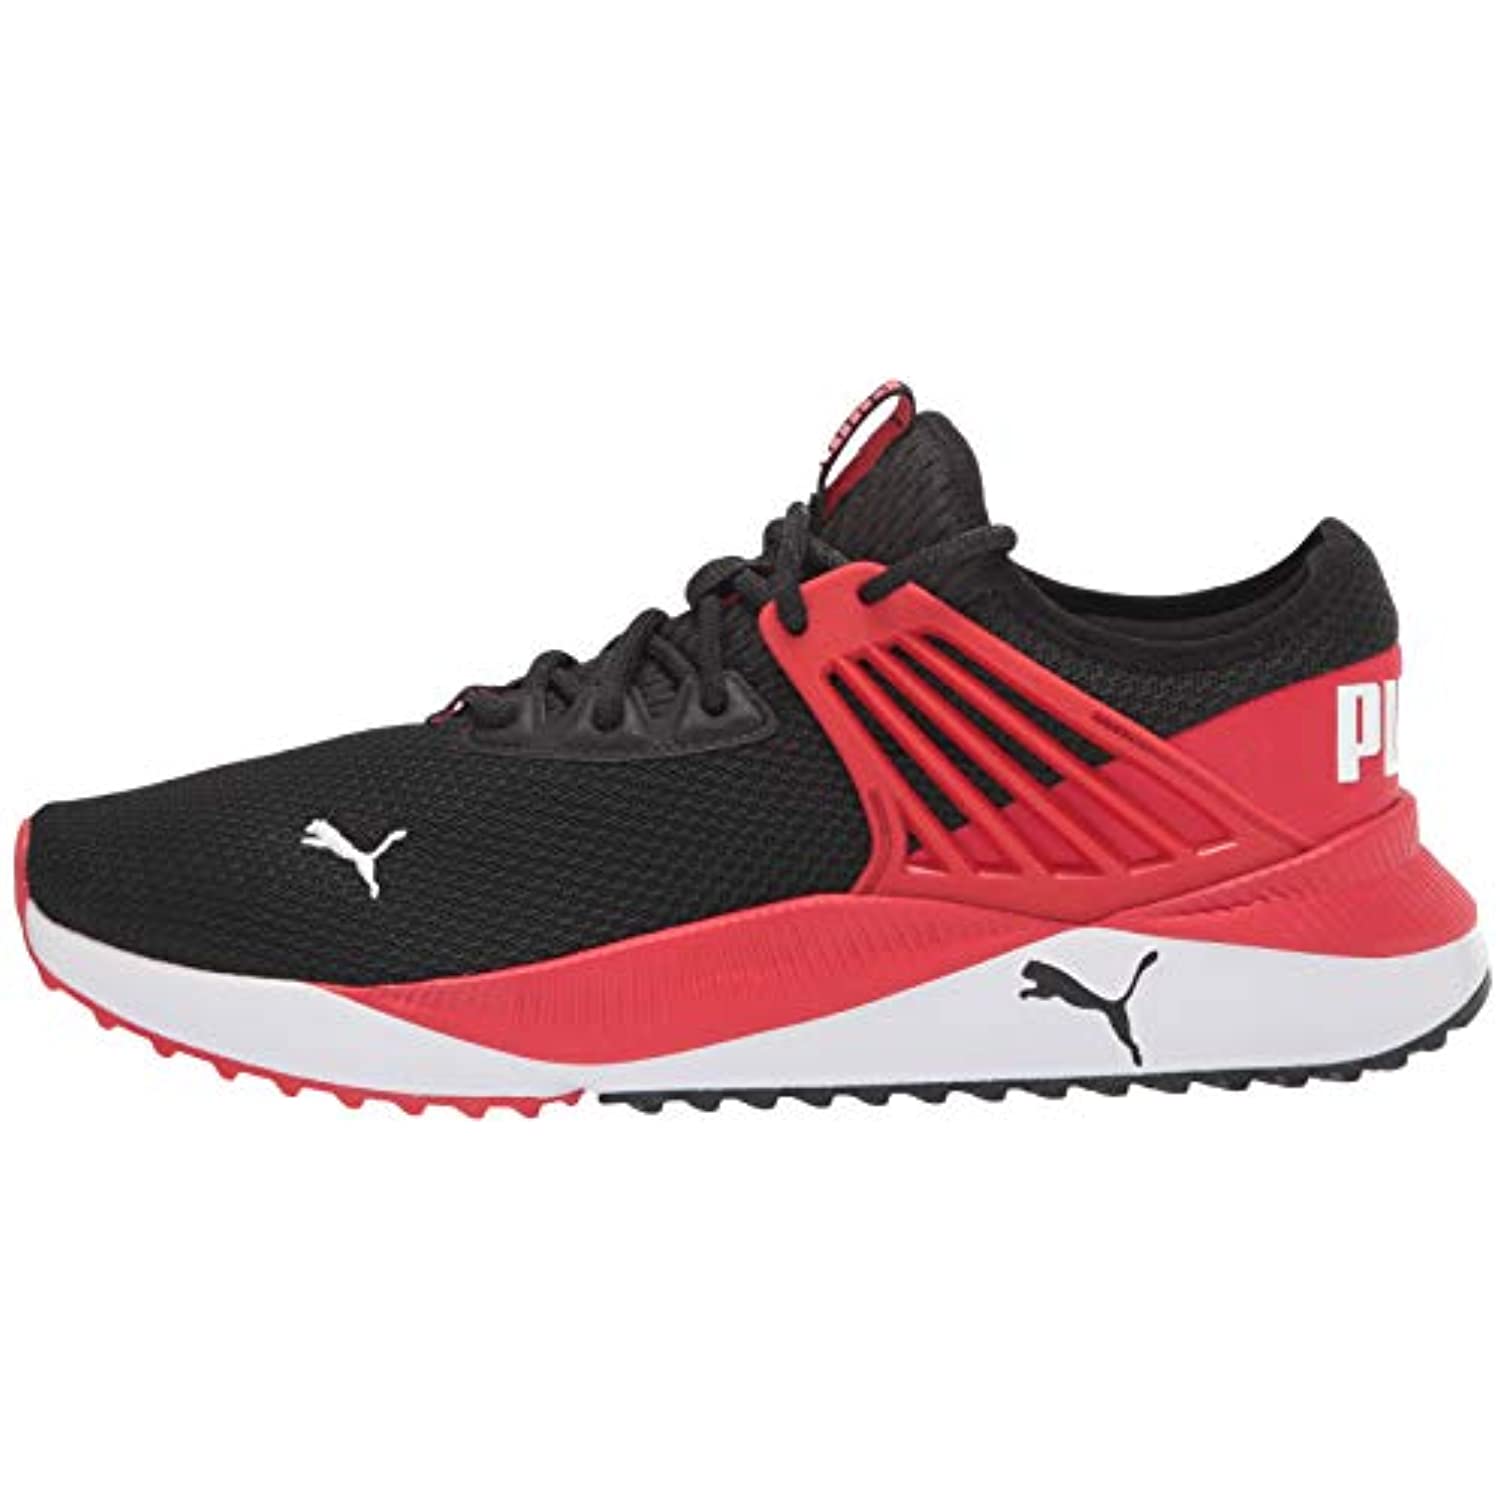 PUMA Men's Pacer Future Sneaker, Black-High Risk Red White, 12 - image 2 of 8